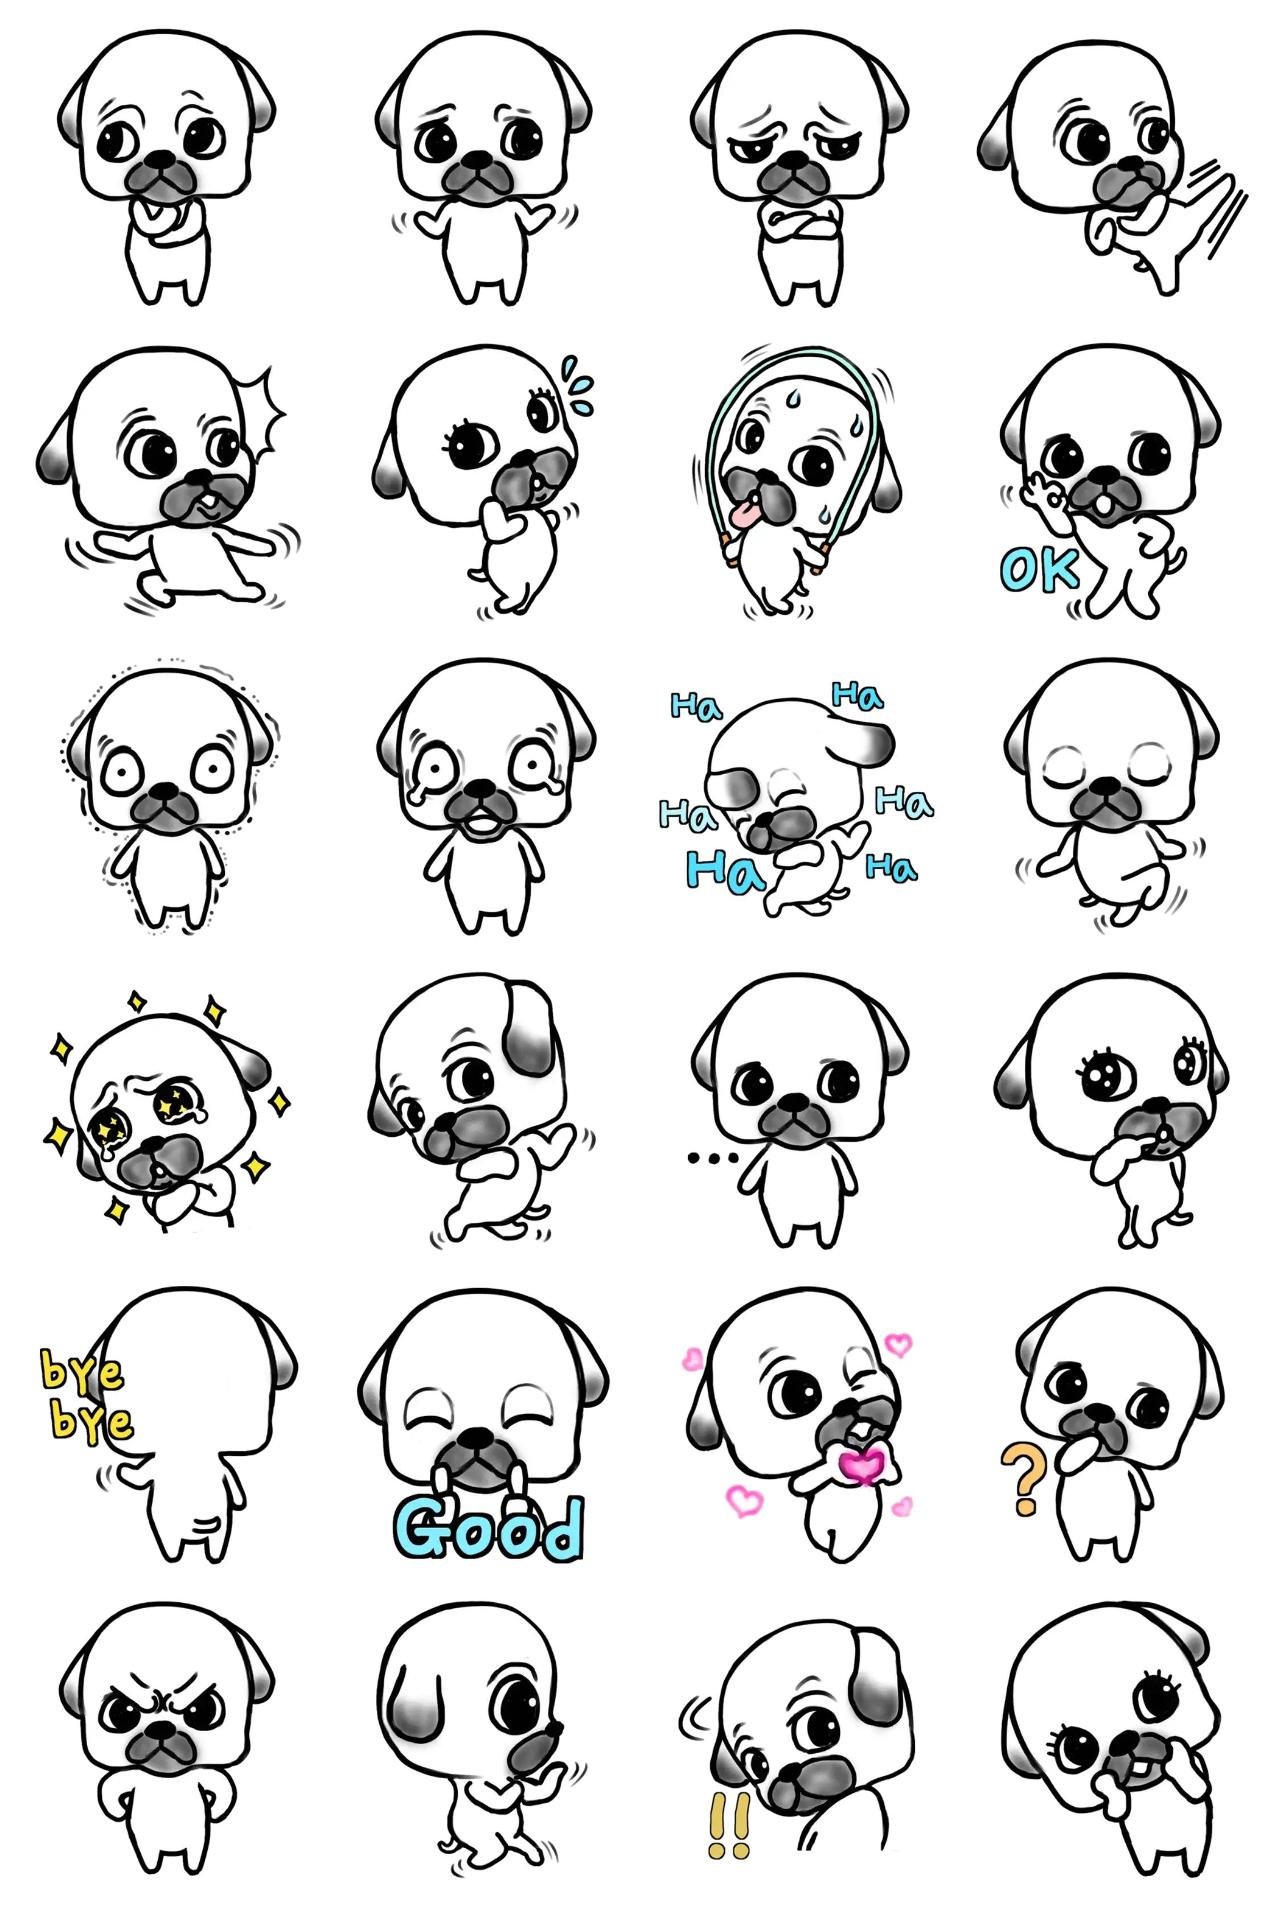 A cute puppy Donggu Animals sticker pack for Whatsapp, Telegram, Signal, and others chatting and message apps